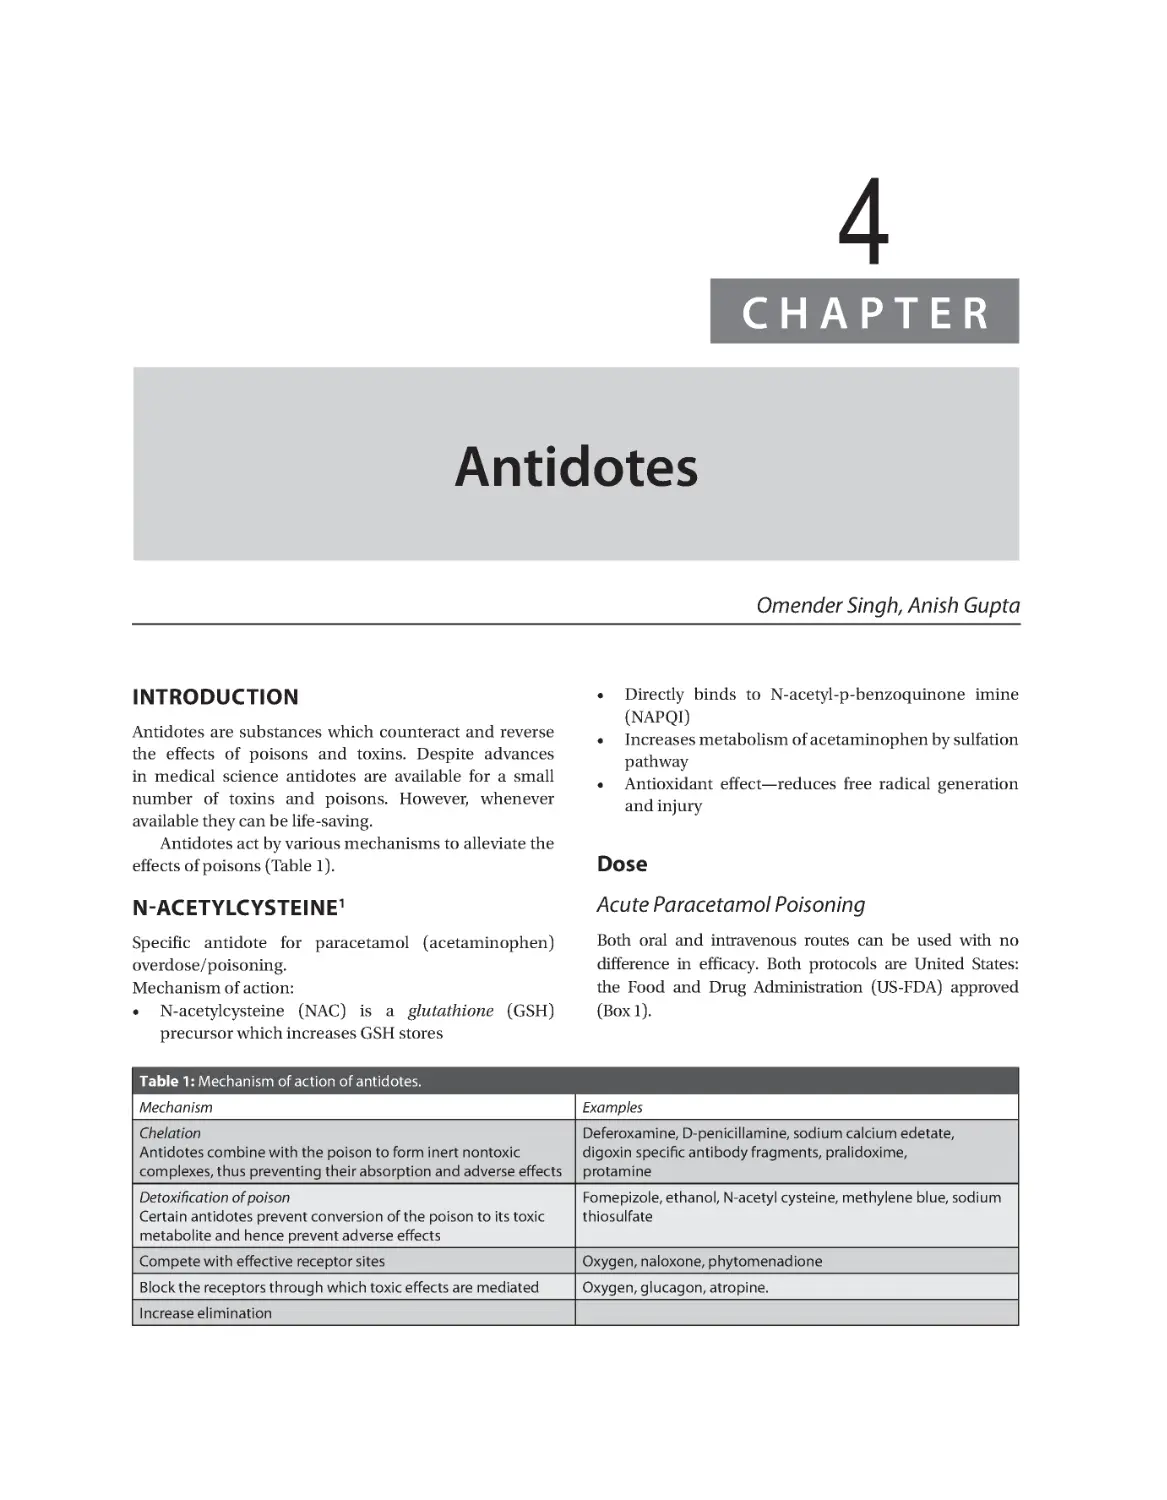 Chapter 4: Antidotes